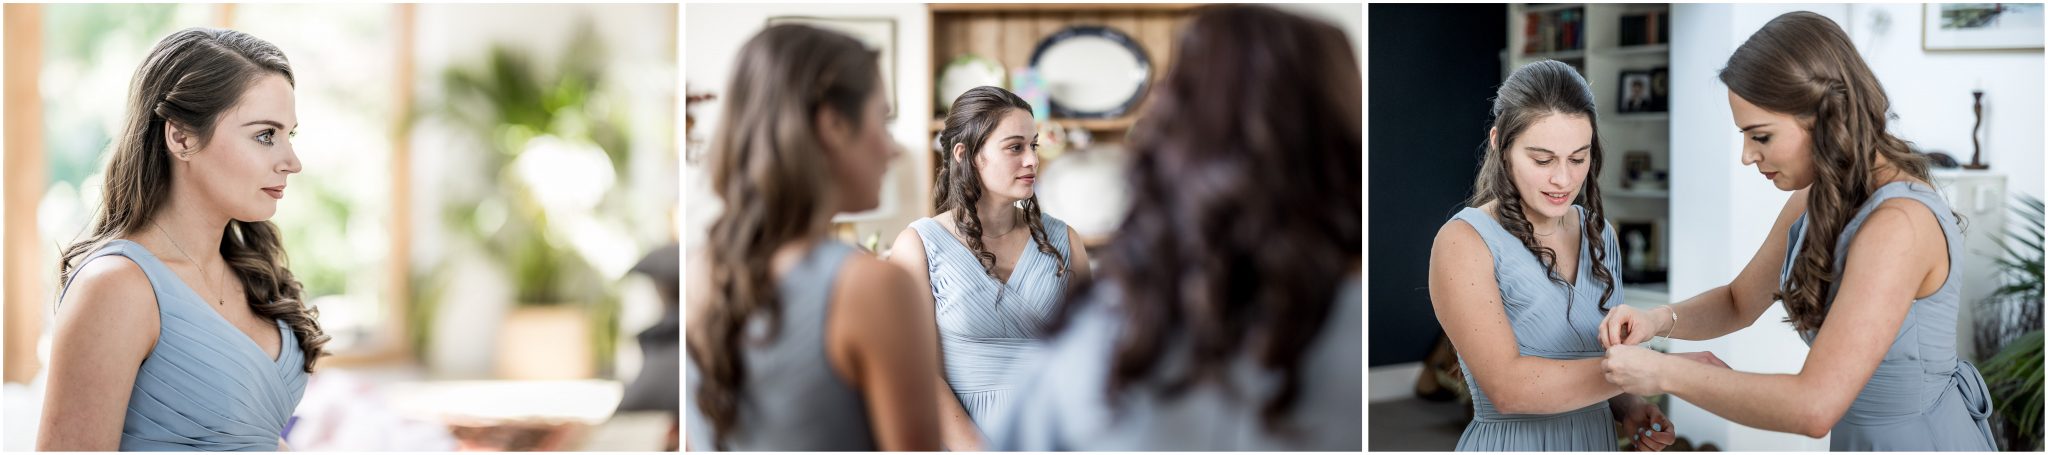 Finishing touches for bridesmaids during bridal wedding preparations